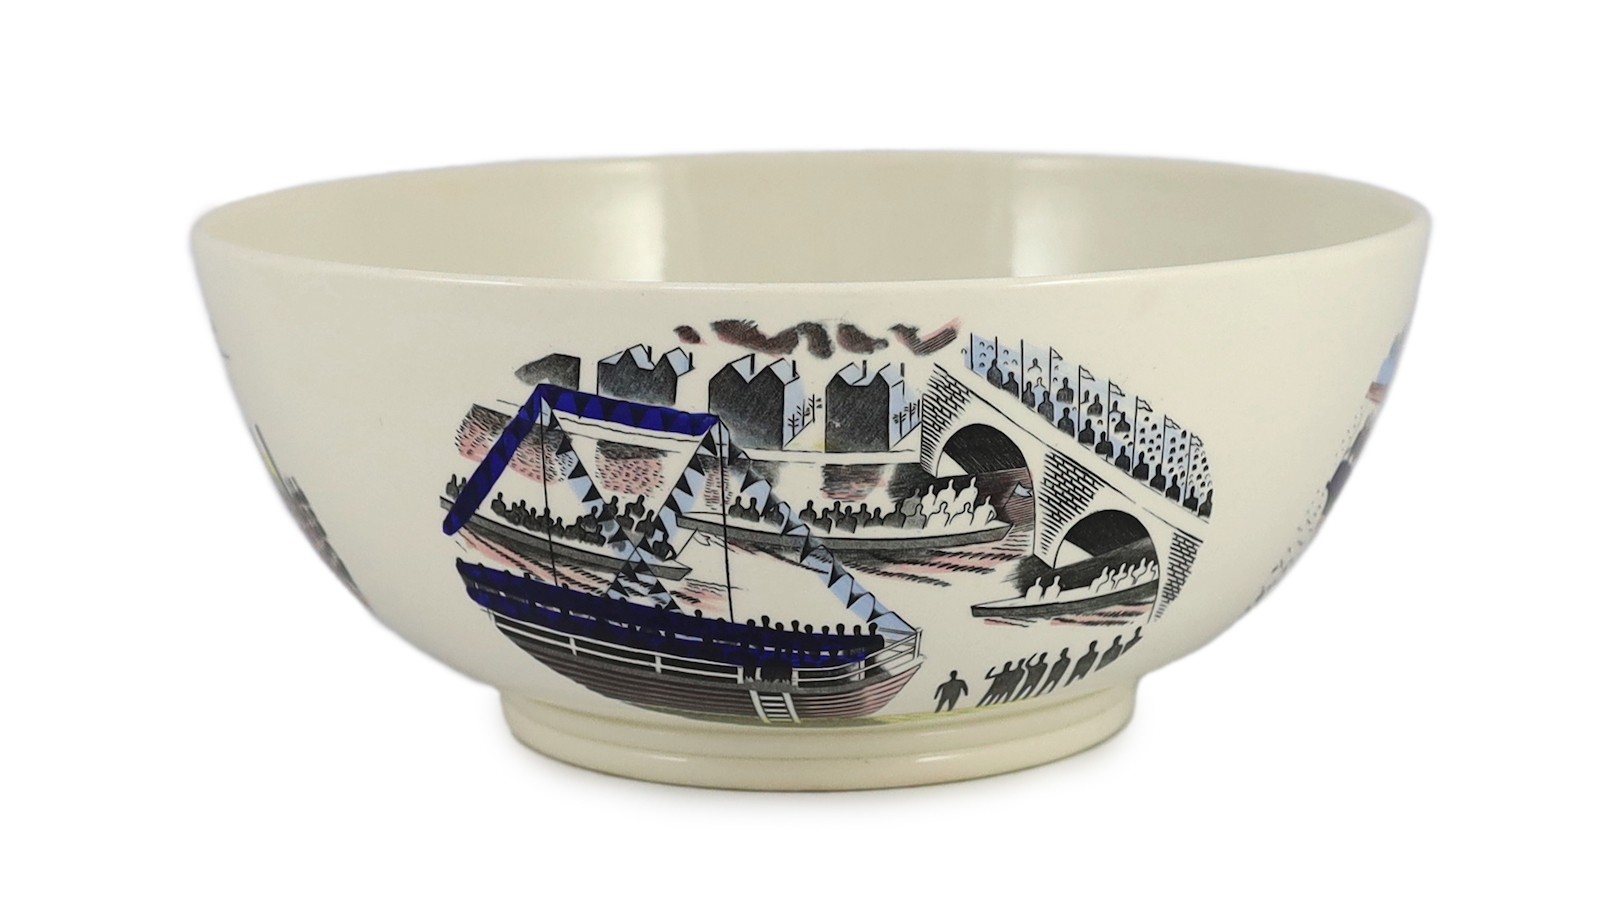 Eric Ravilious (1903-1942) for Wedgwood, a 'Boat Race' large bowl, c.1938, 30cm diameter                                                                                                                                    